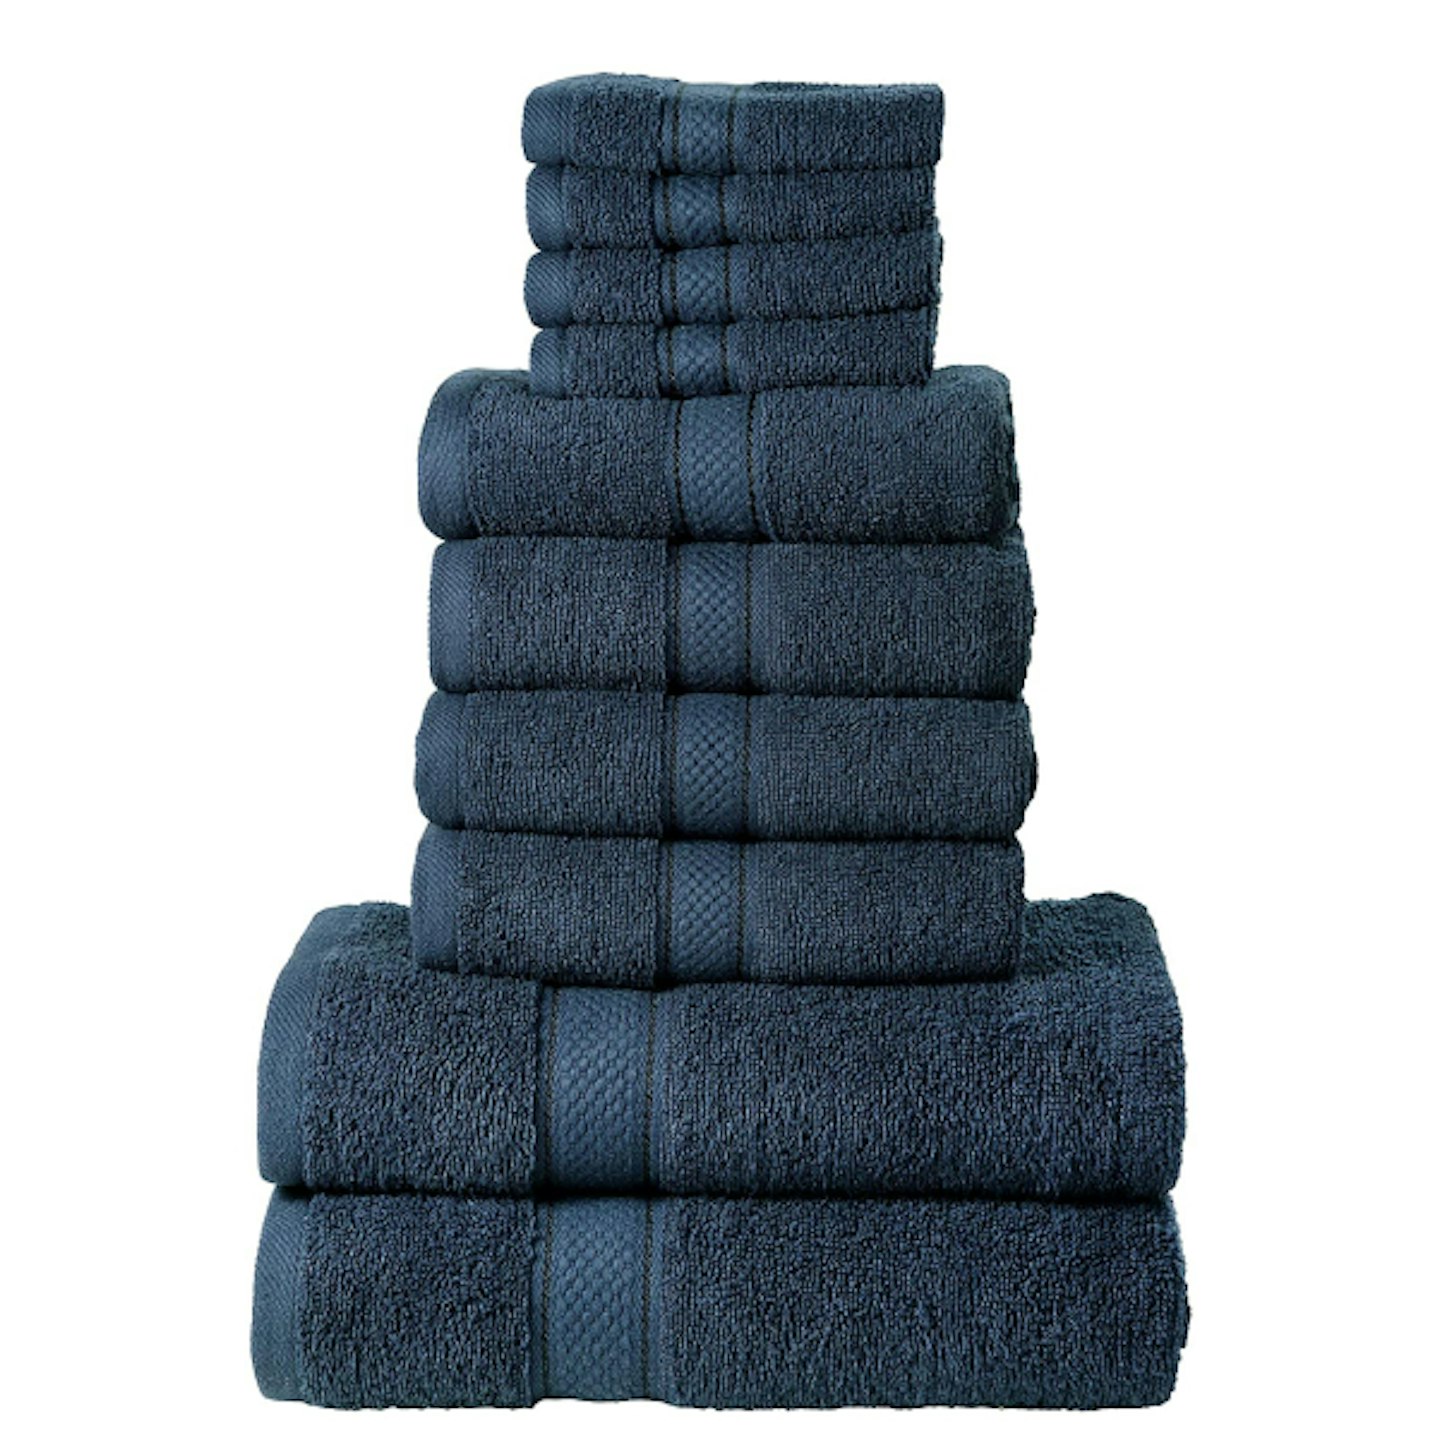 Todds Amazon towels